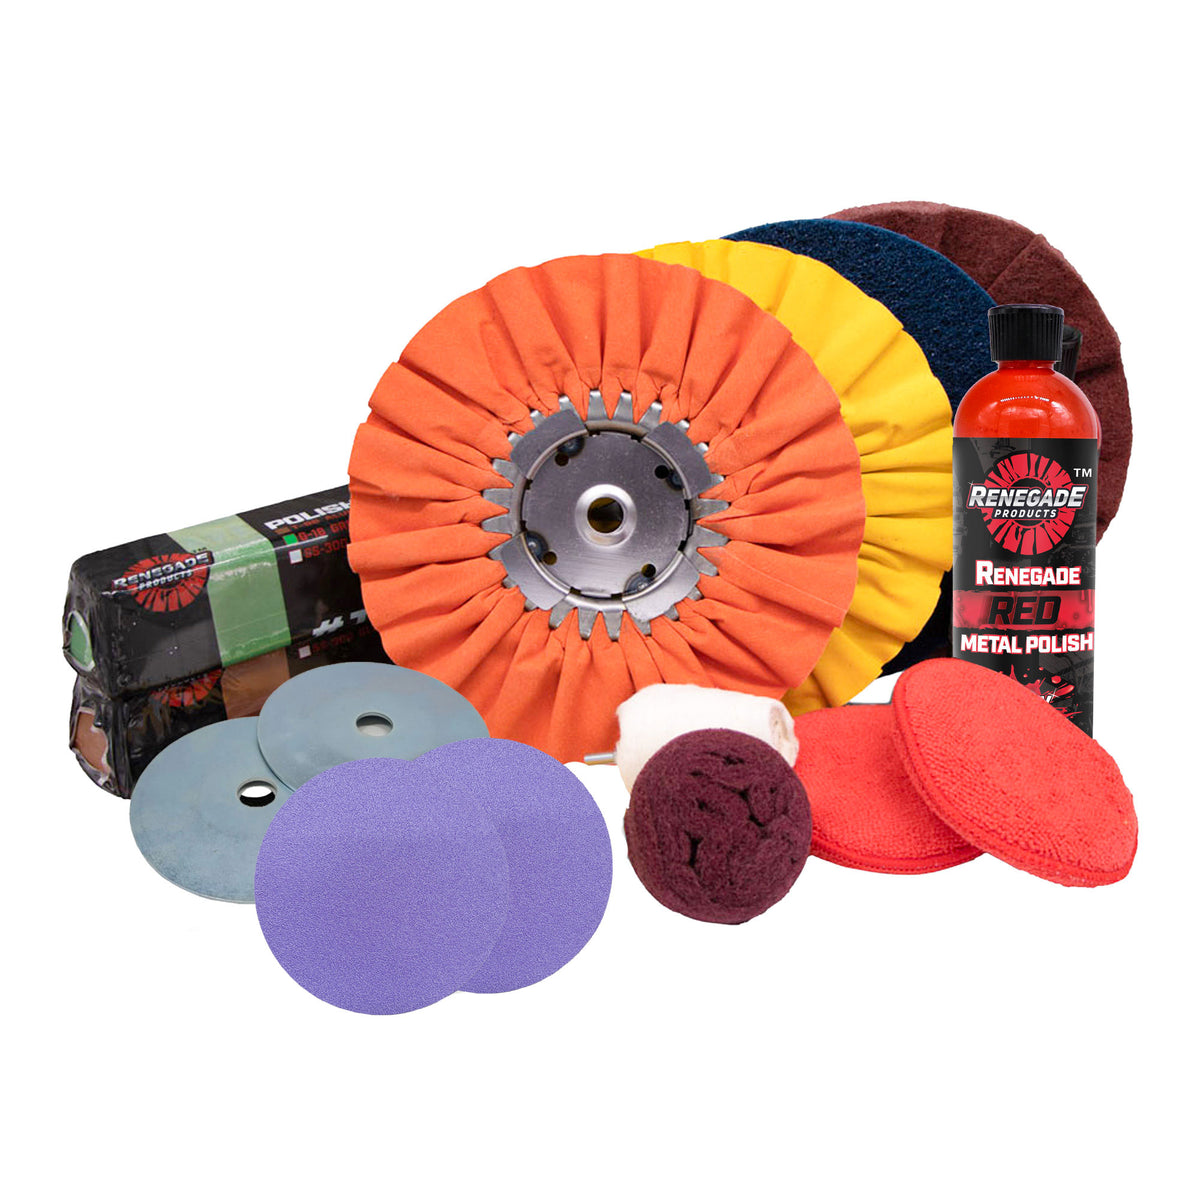 Renegade Products Big Rig & Semi Truck Metal Polishing Complete Kit with Buffing Wheels, Buffing Compound, Safety Flanges, Polishing Accessories and R